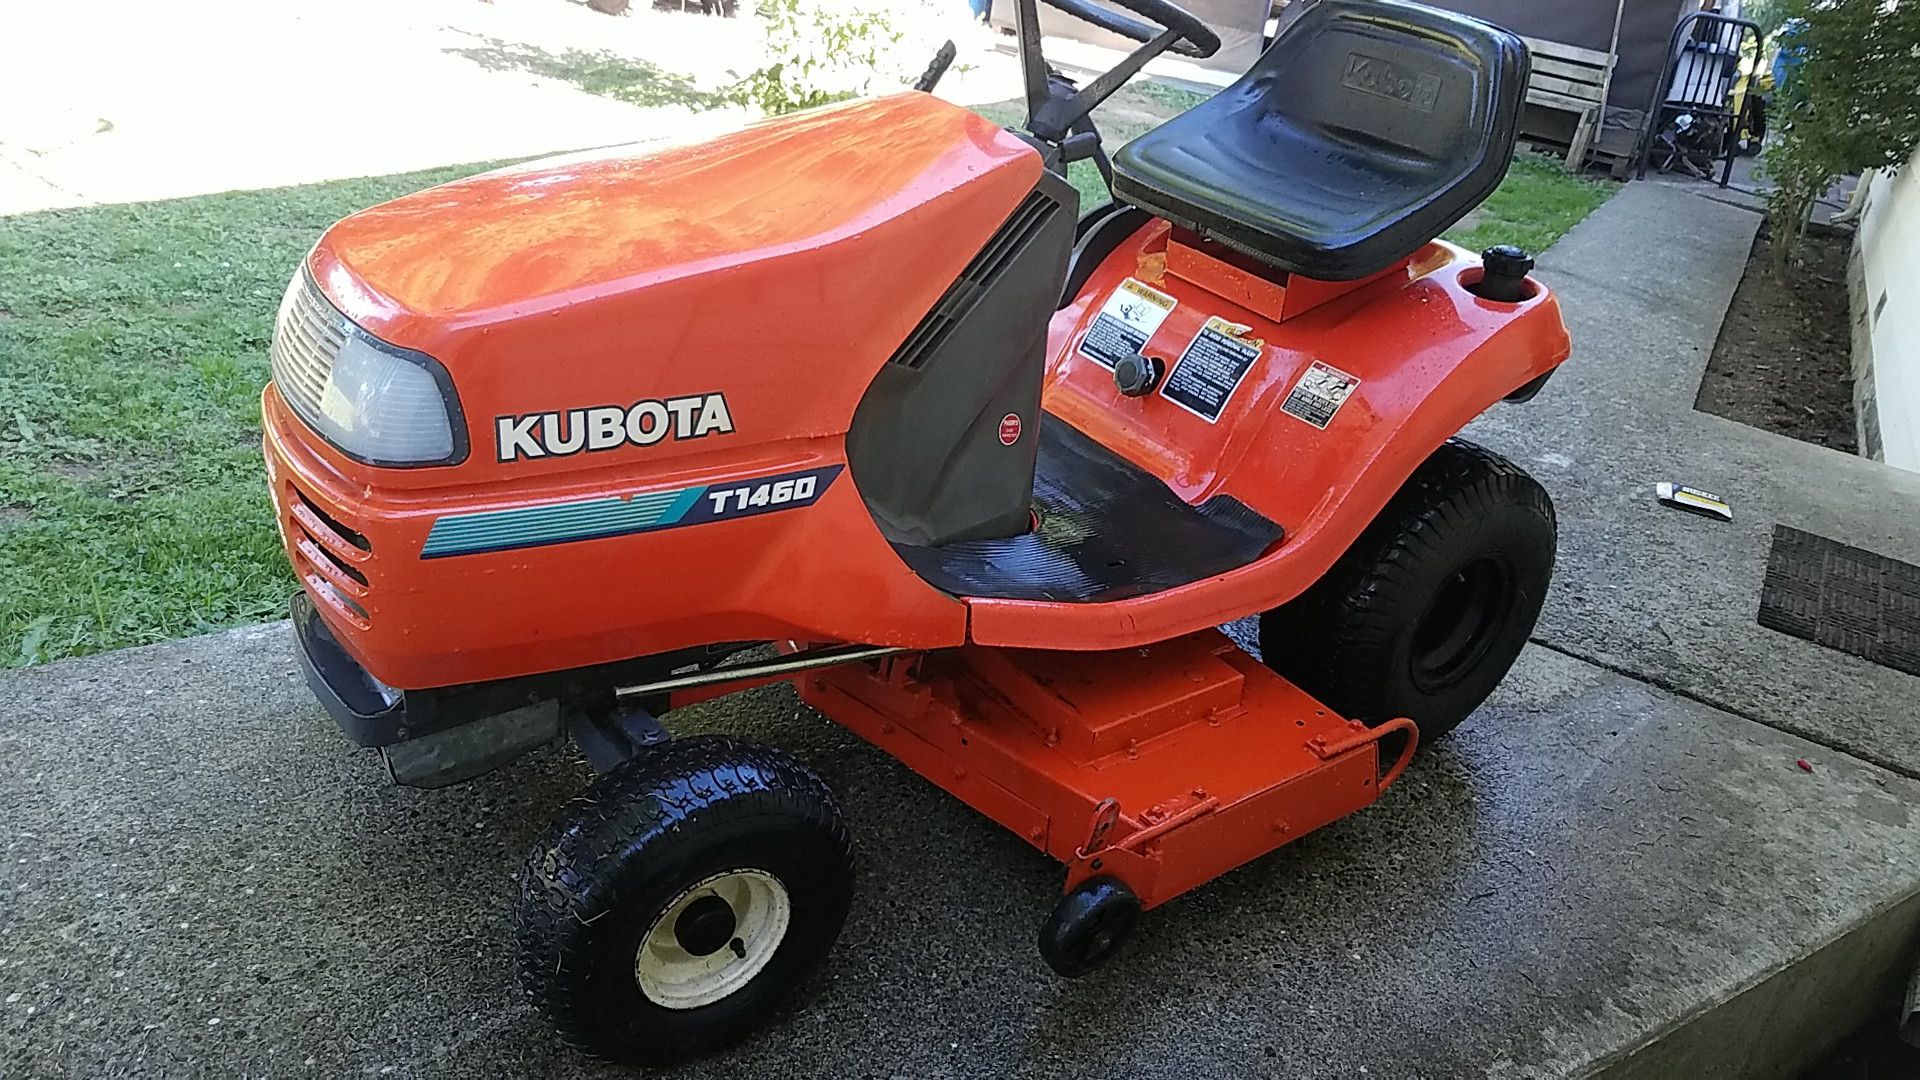 KUBOTA T1460 lawn tractor. New 48"deck runs and mows great